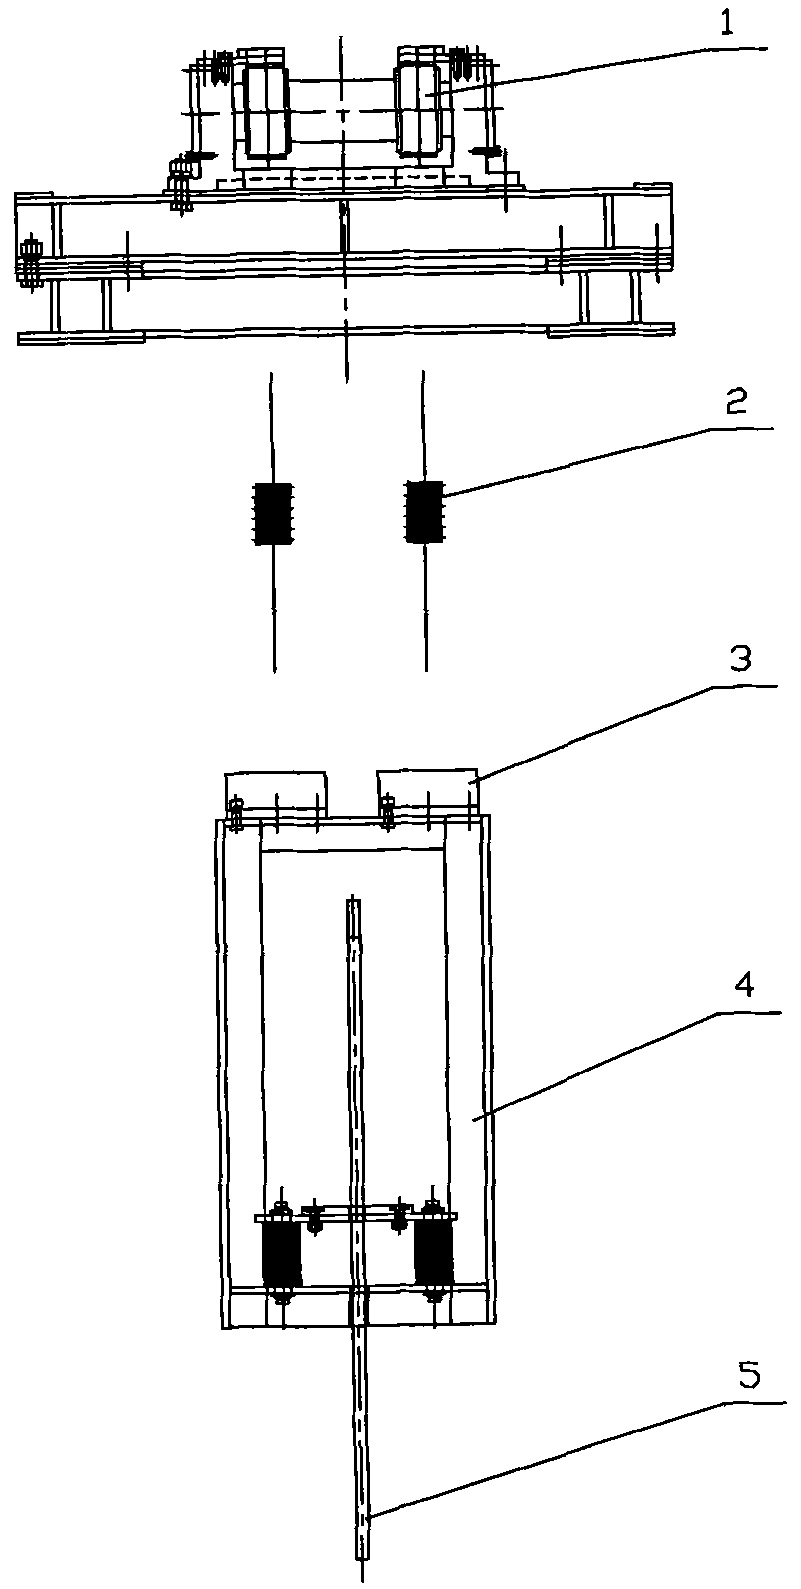 Tractor tower type pumping unit device